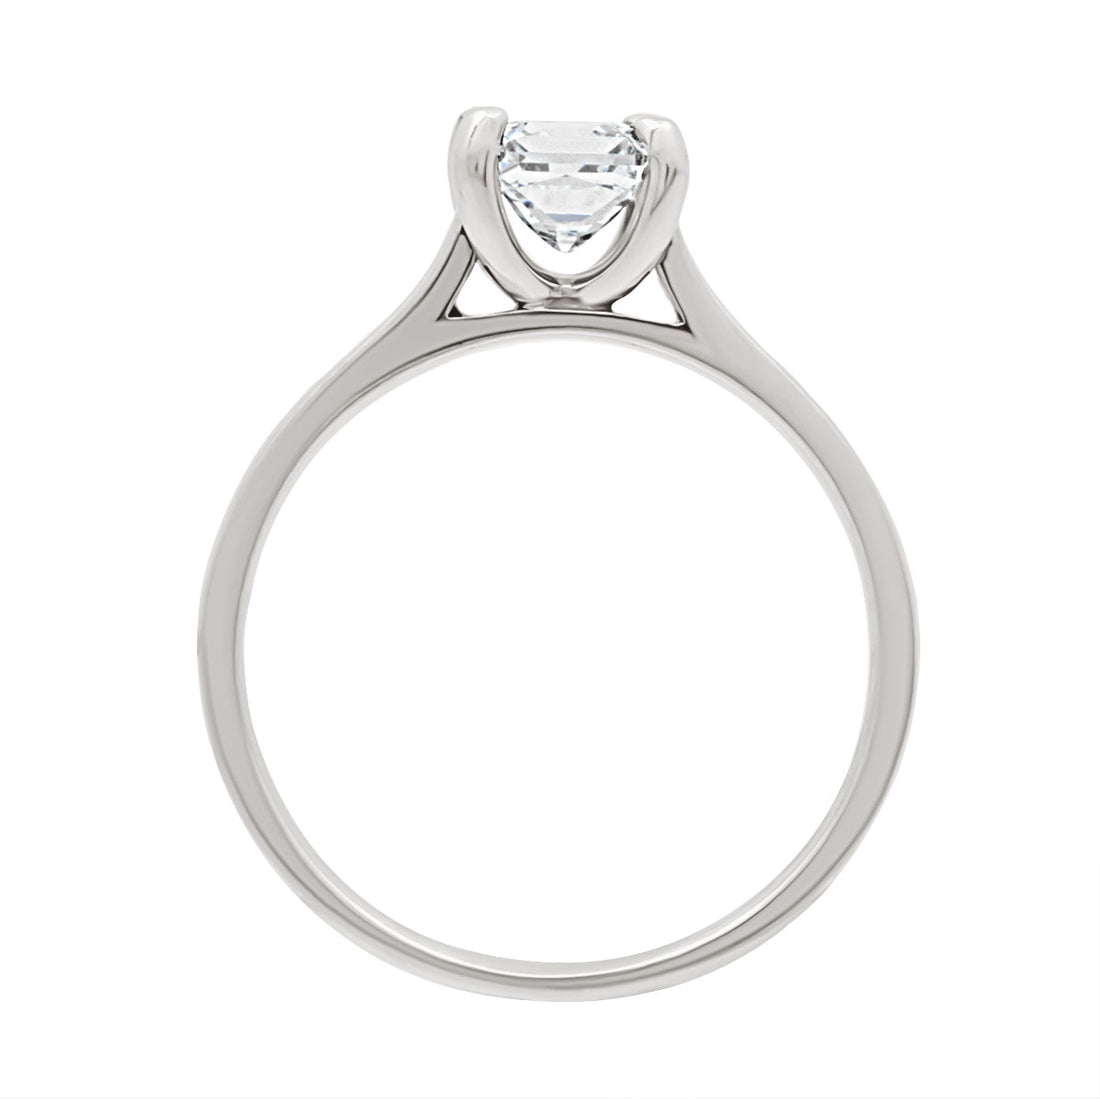 Princess cut engagement ring in platinum standing upright